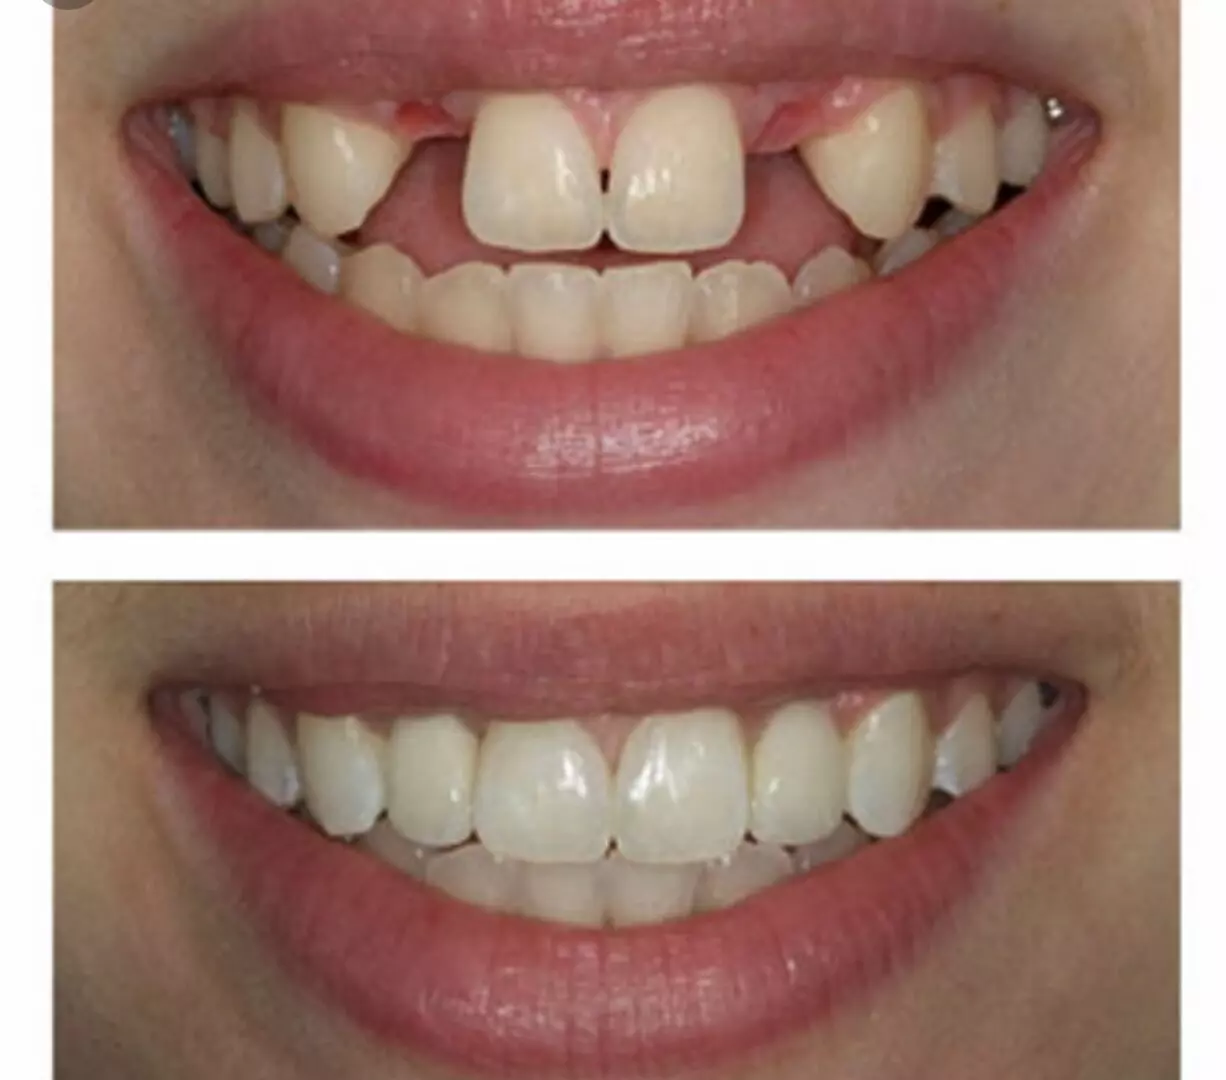 Before and after photos of our dental care services